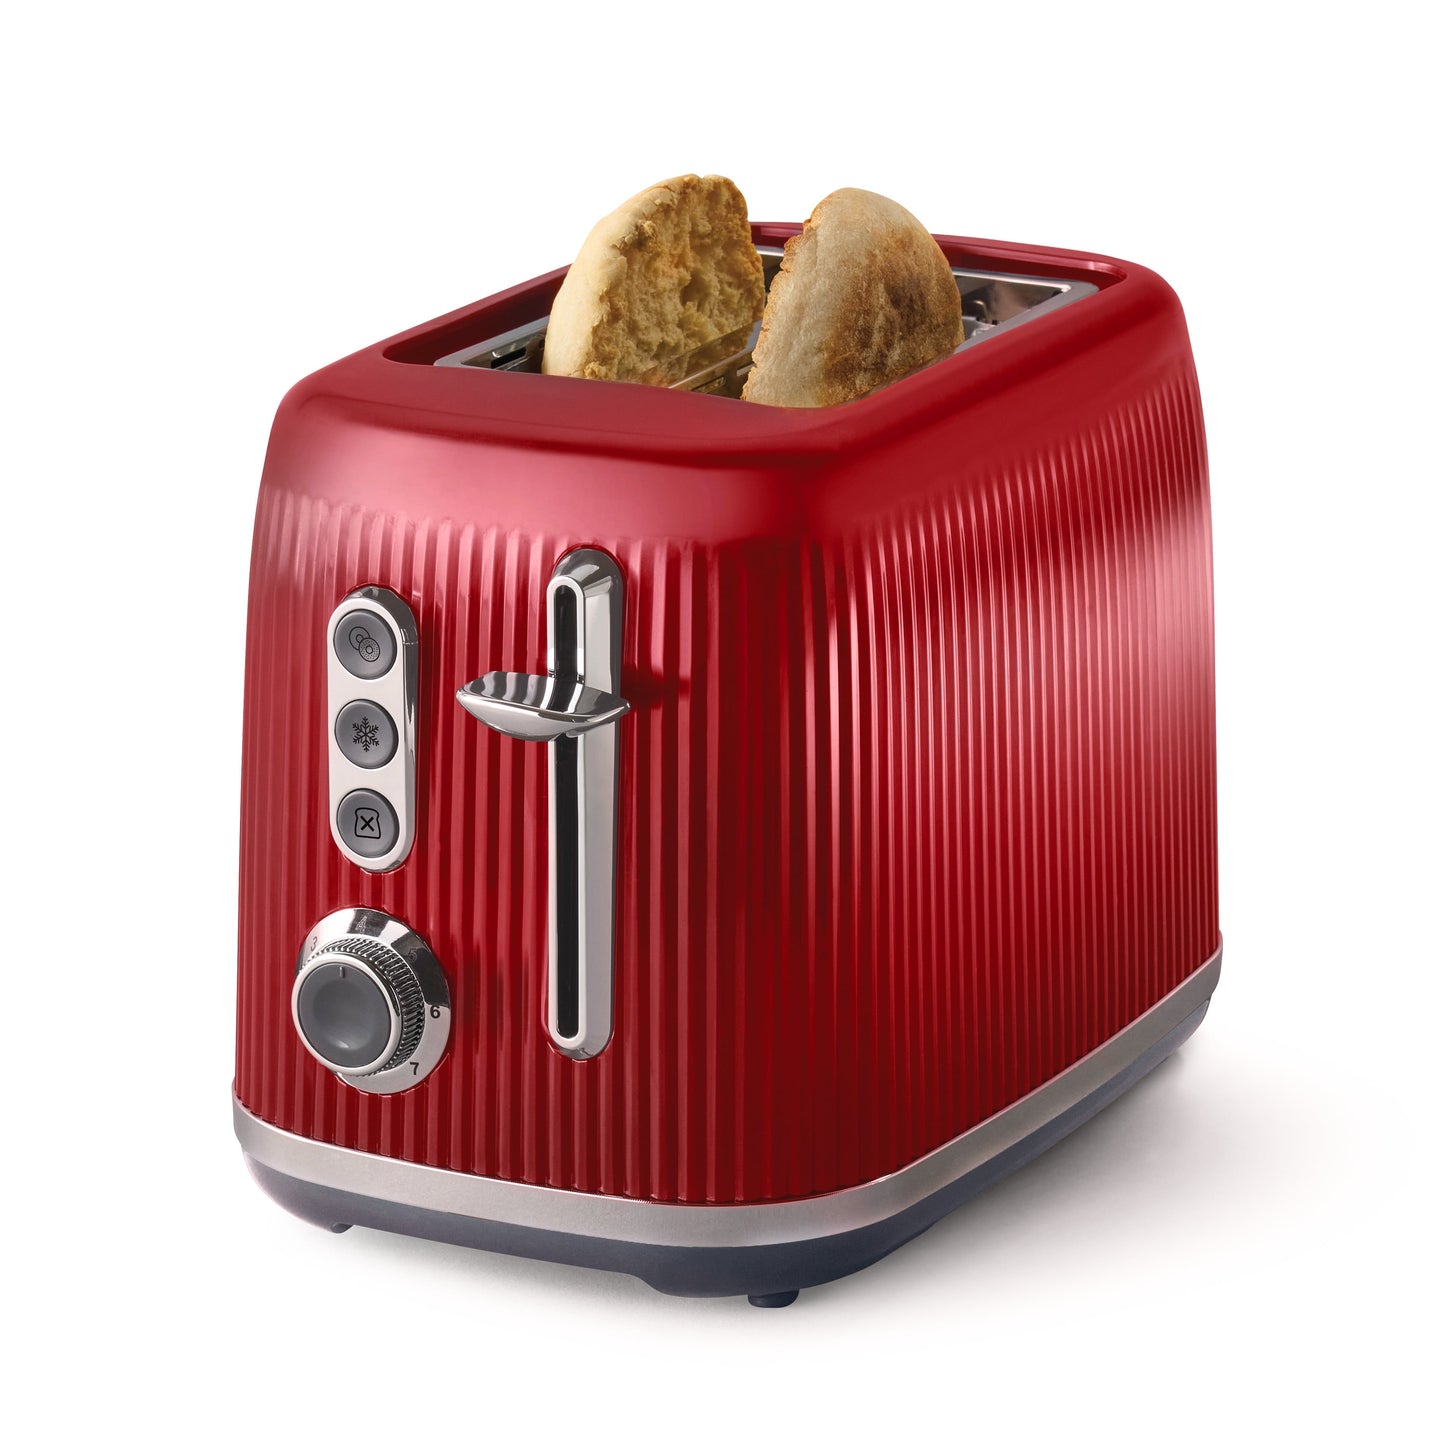 Oster 2-Slice Toaster with Extra-Wide Slots, Red